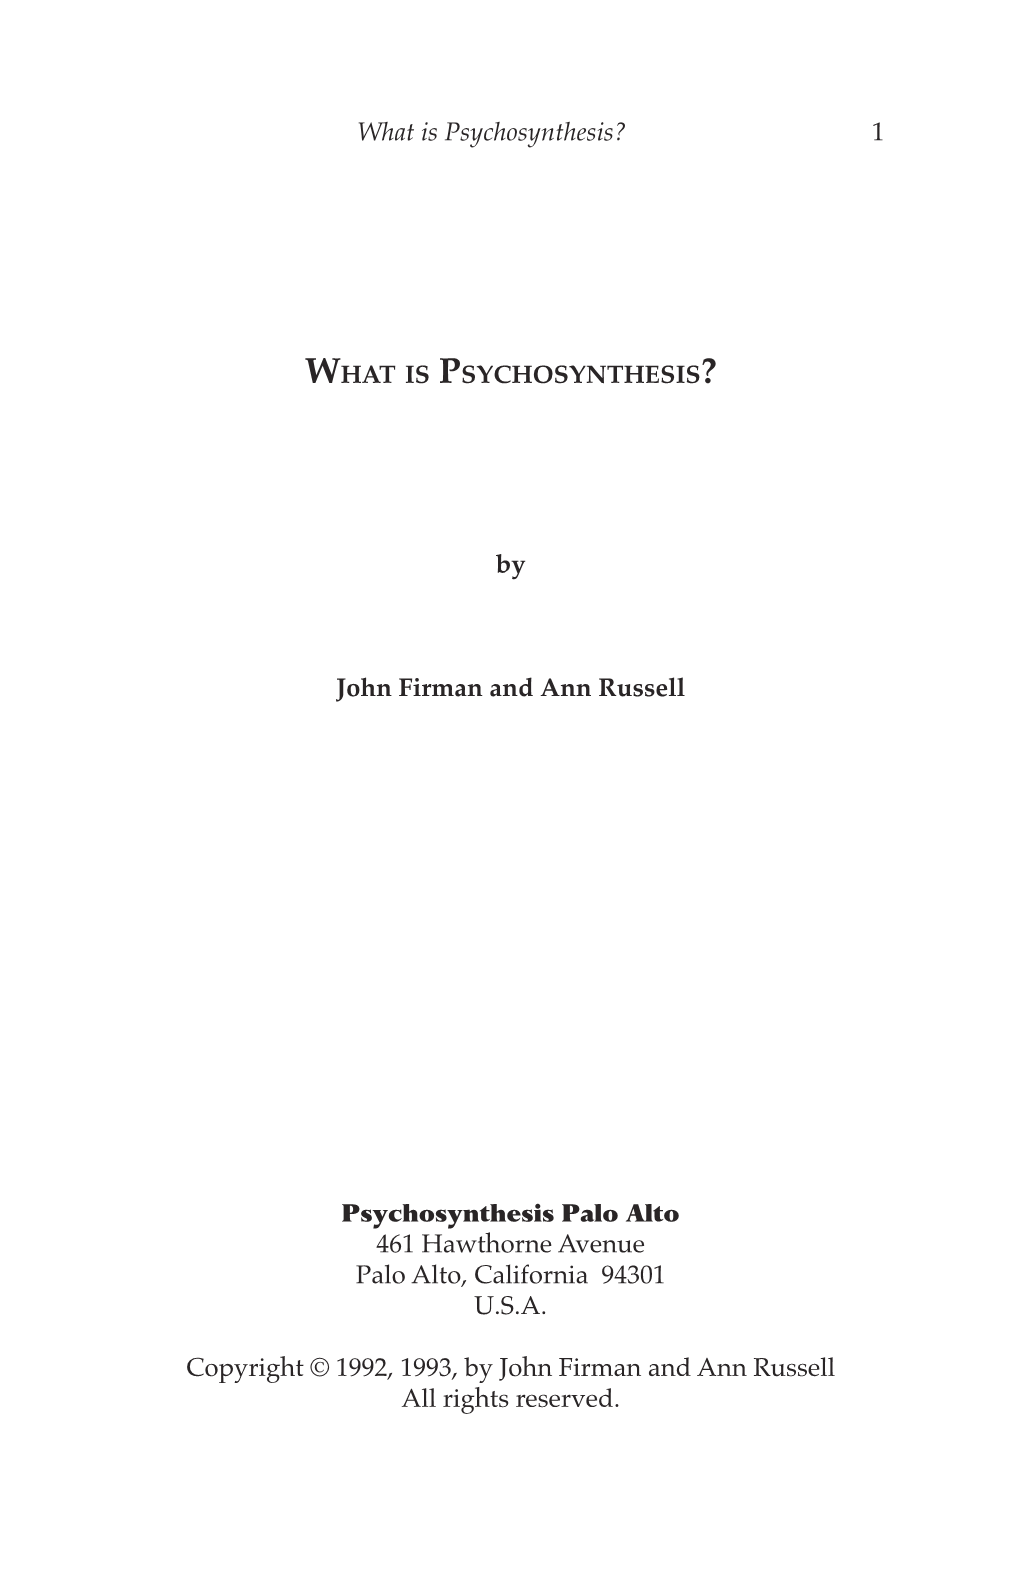 What Is Psychosynthesis? 1 by John Firman and Ann Russell